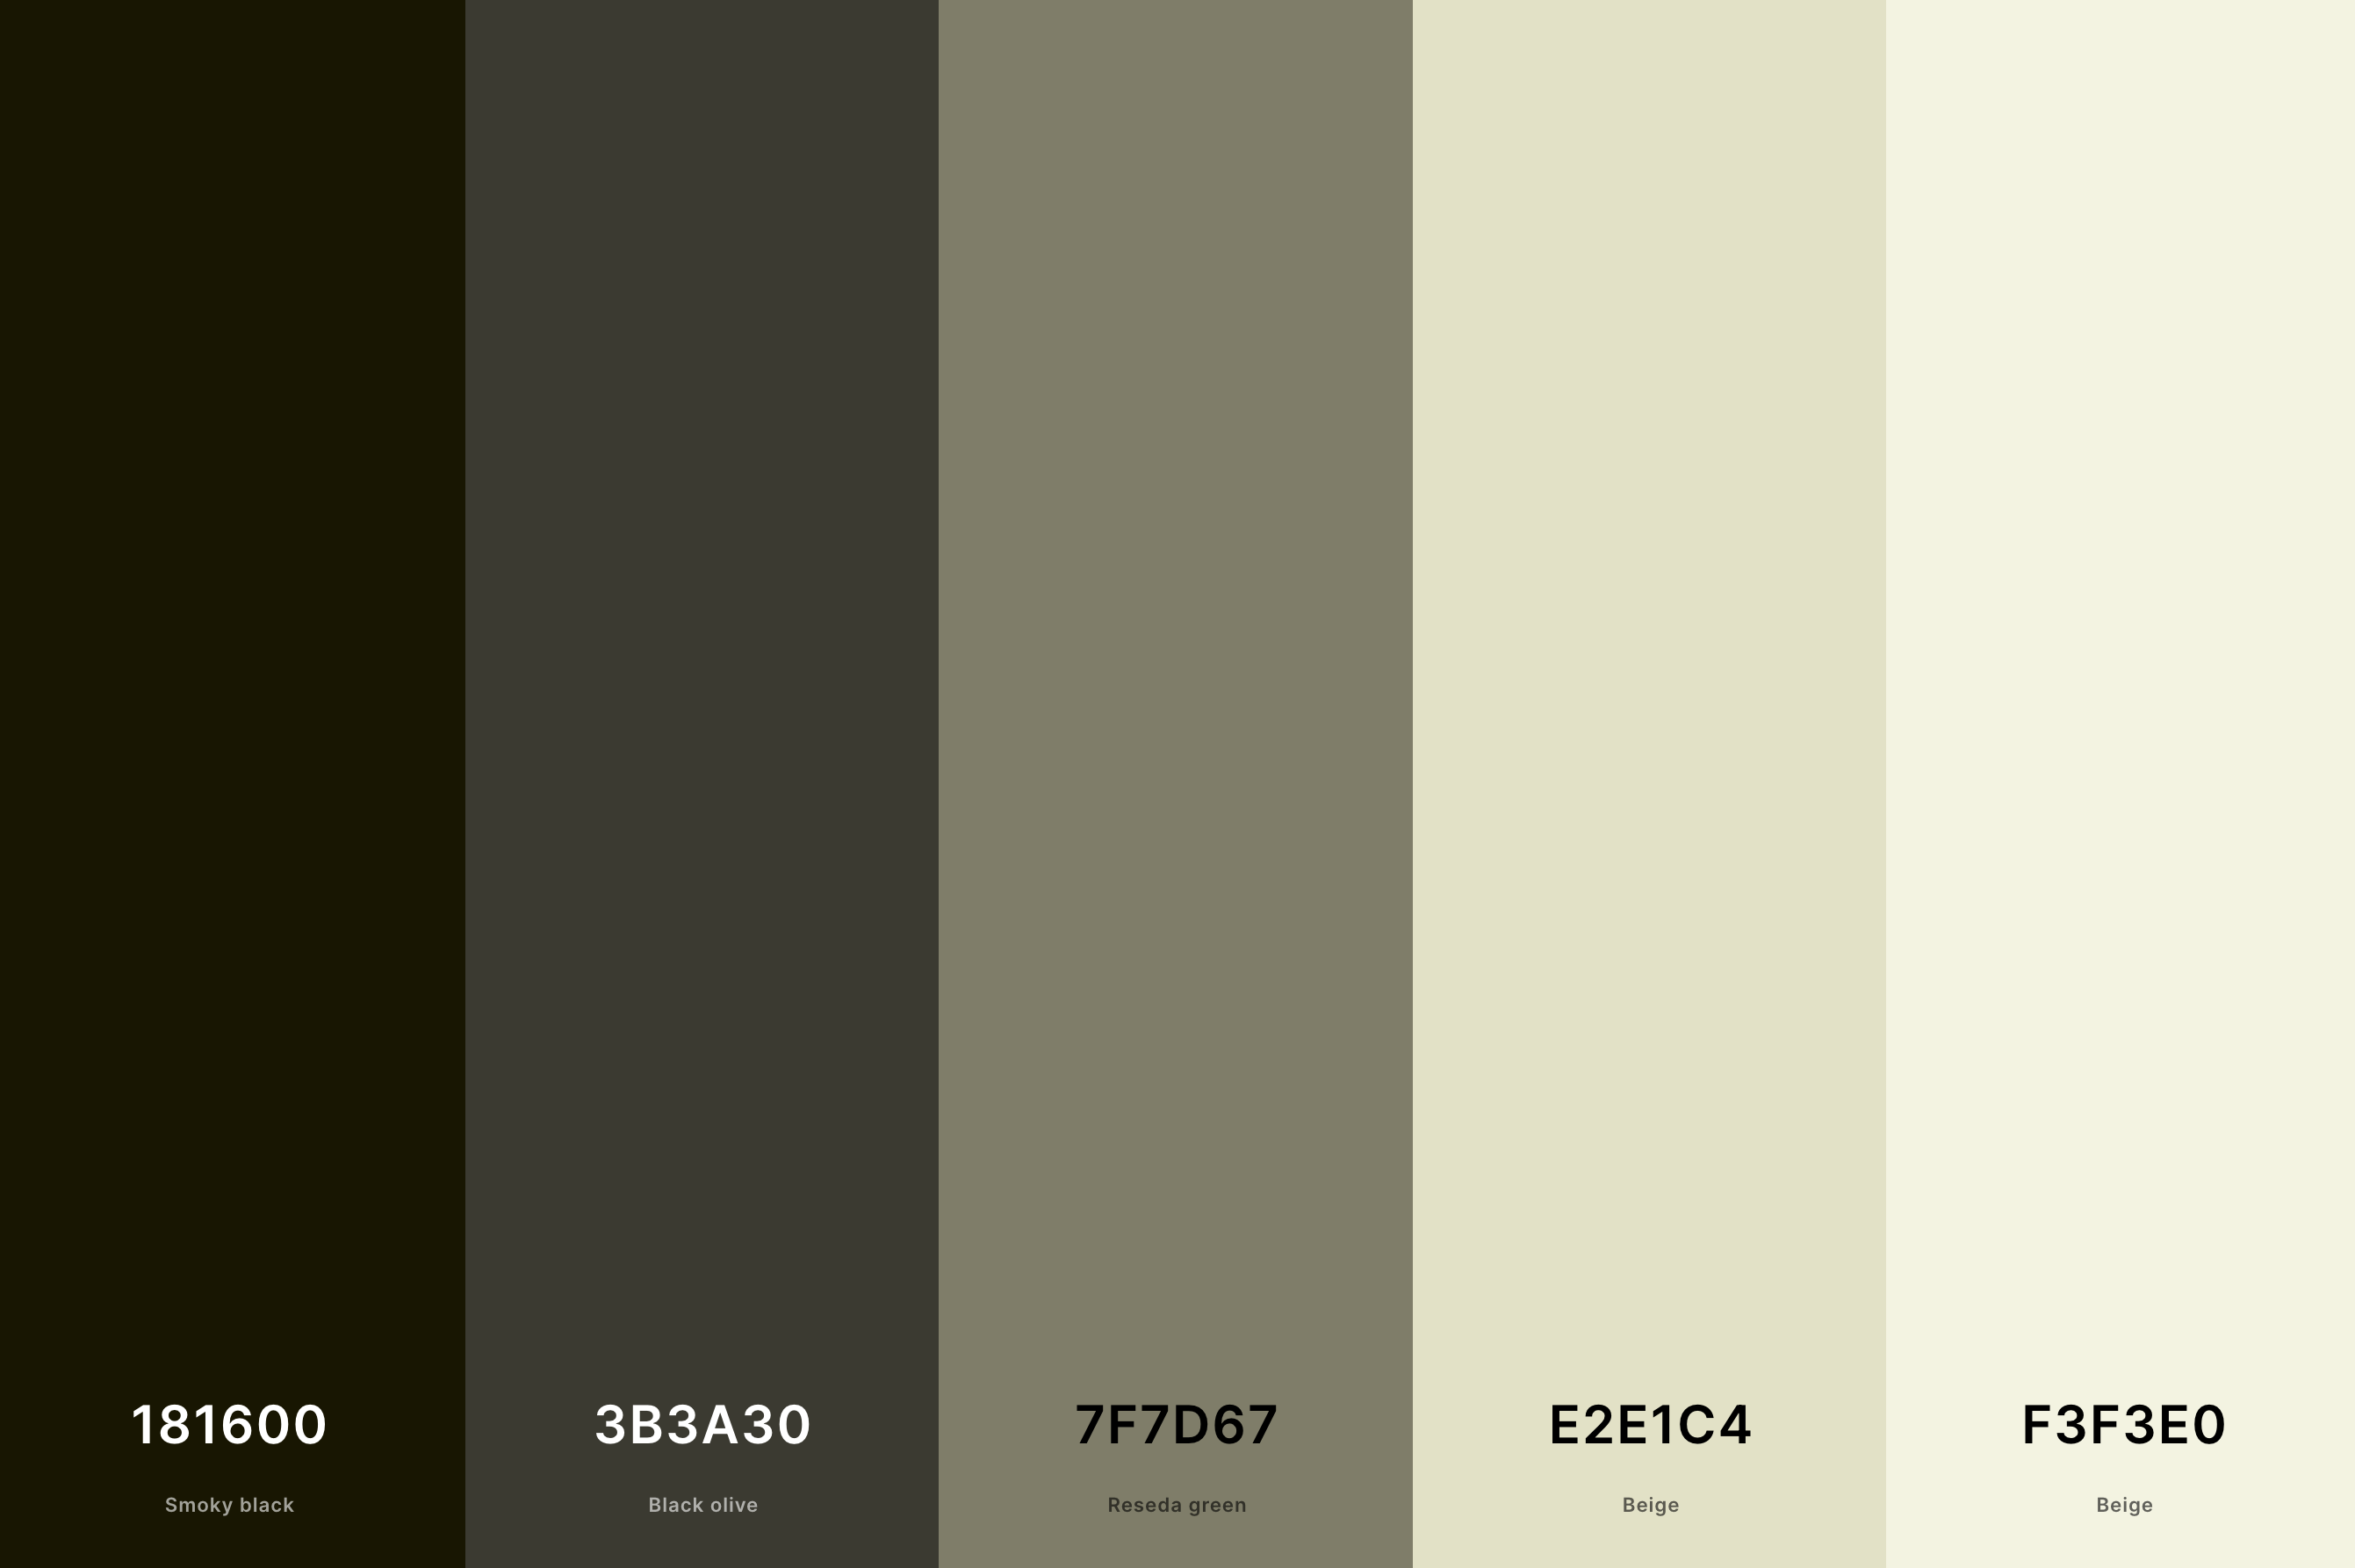 19. Black And Cream Color Palette Color Palette with Smoky Black (Hex #181600) + Black Olive (Hex #3B3A30) + Reseda Green (Hex #7F7D67) + Beige (Hex #E2E1C4) + Beige (Hex #F3F3E0) Color Palette with Hex Codes